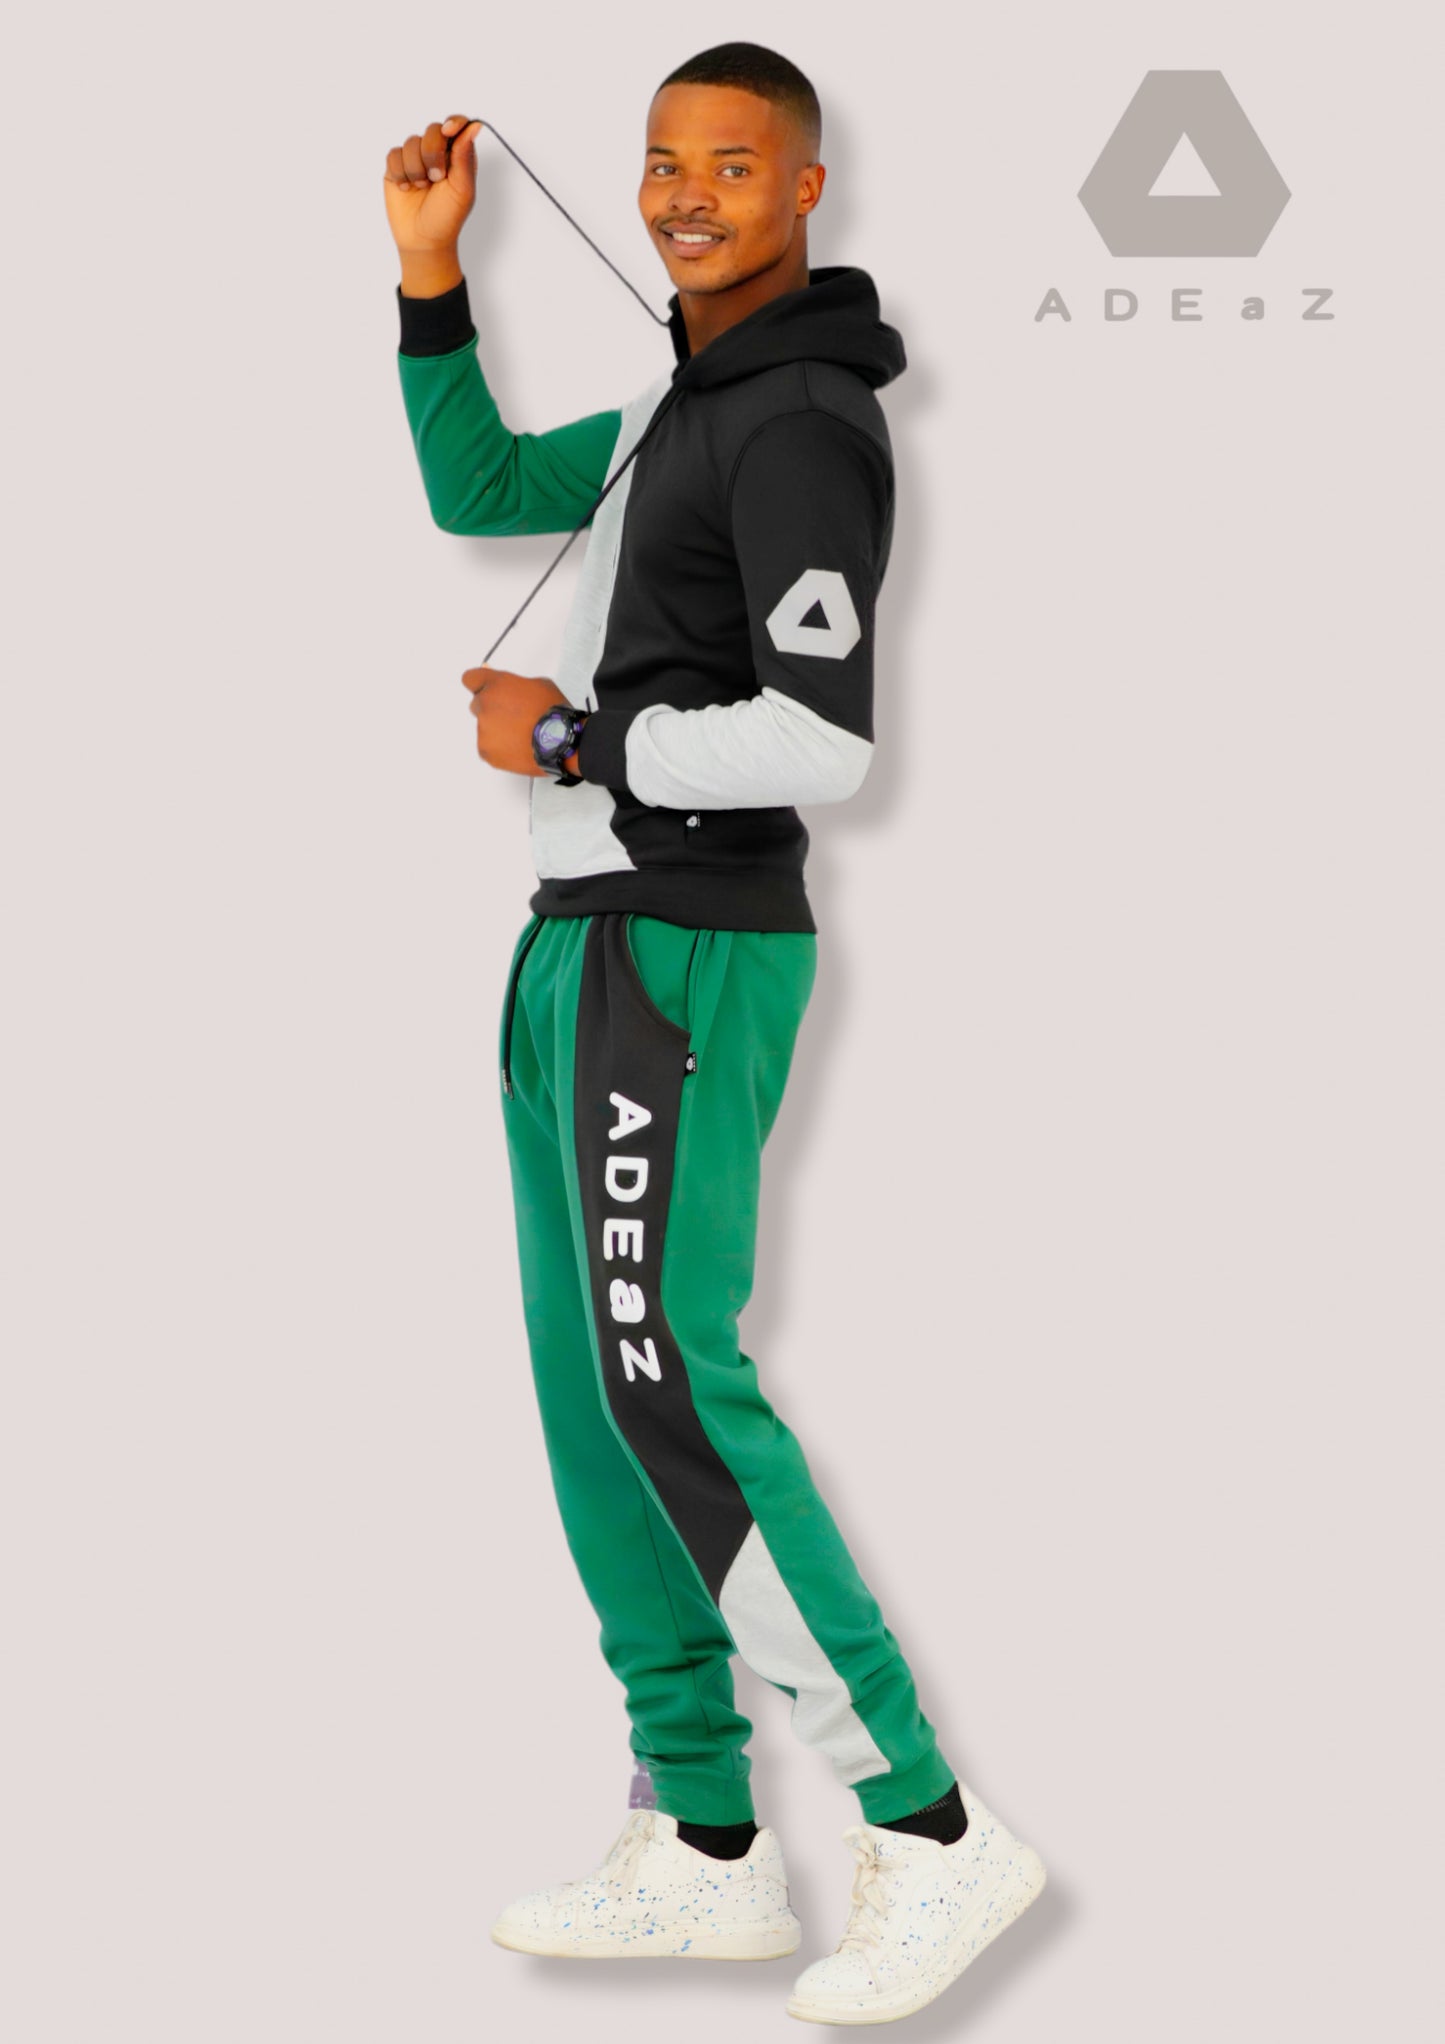 Men's jogging bottoms in hunter green, providing relaxed and versatile comfort for active or casual wear.